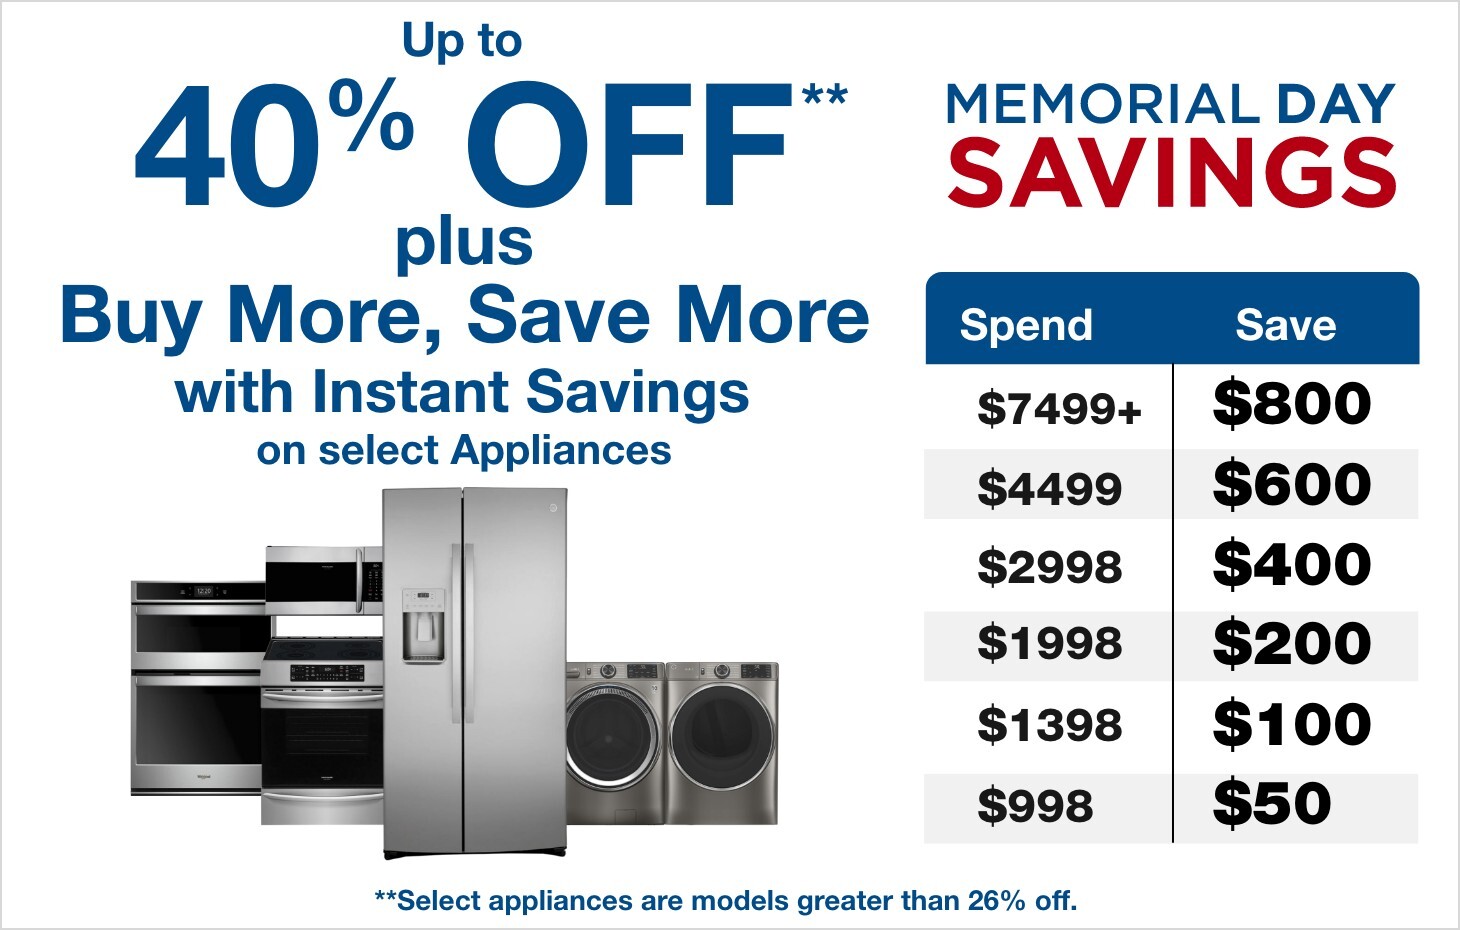 Up to 40% off plus Buy More, Save More with Instant Savings on select Appliances Spend $7499 Save $800, Spend $4499 Save $600, Spend $2998 Save $400, Spend $1998, Save $200, Spend $1398 Save $100 Spend $998 Save $50